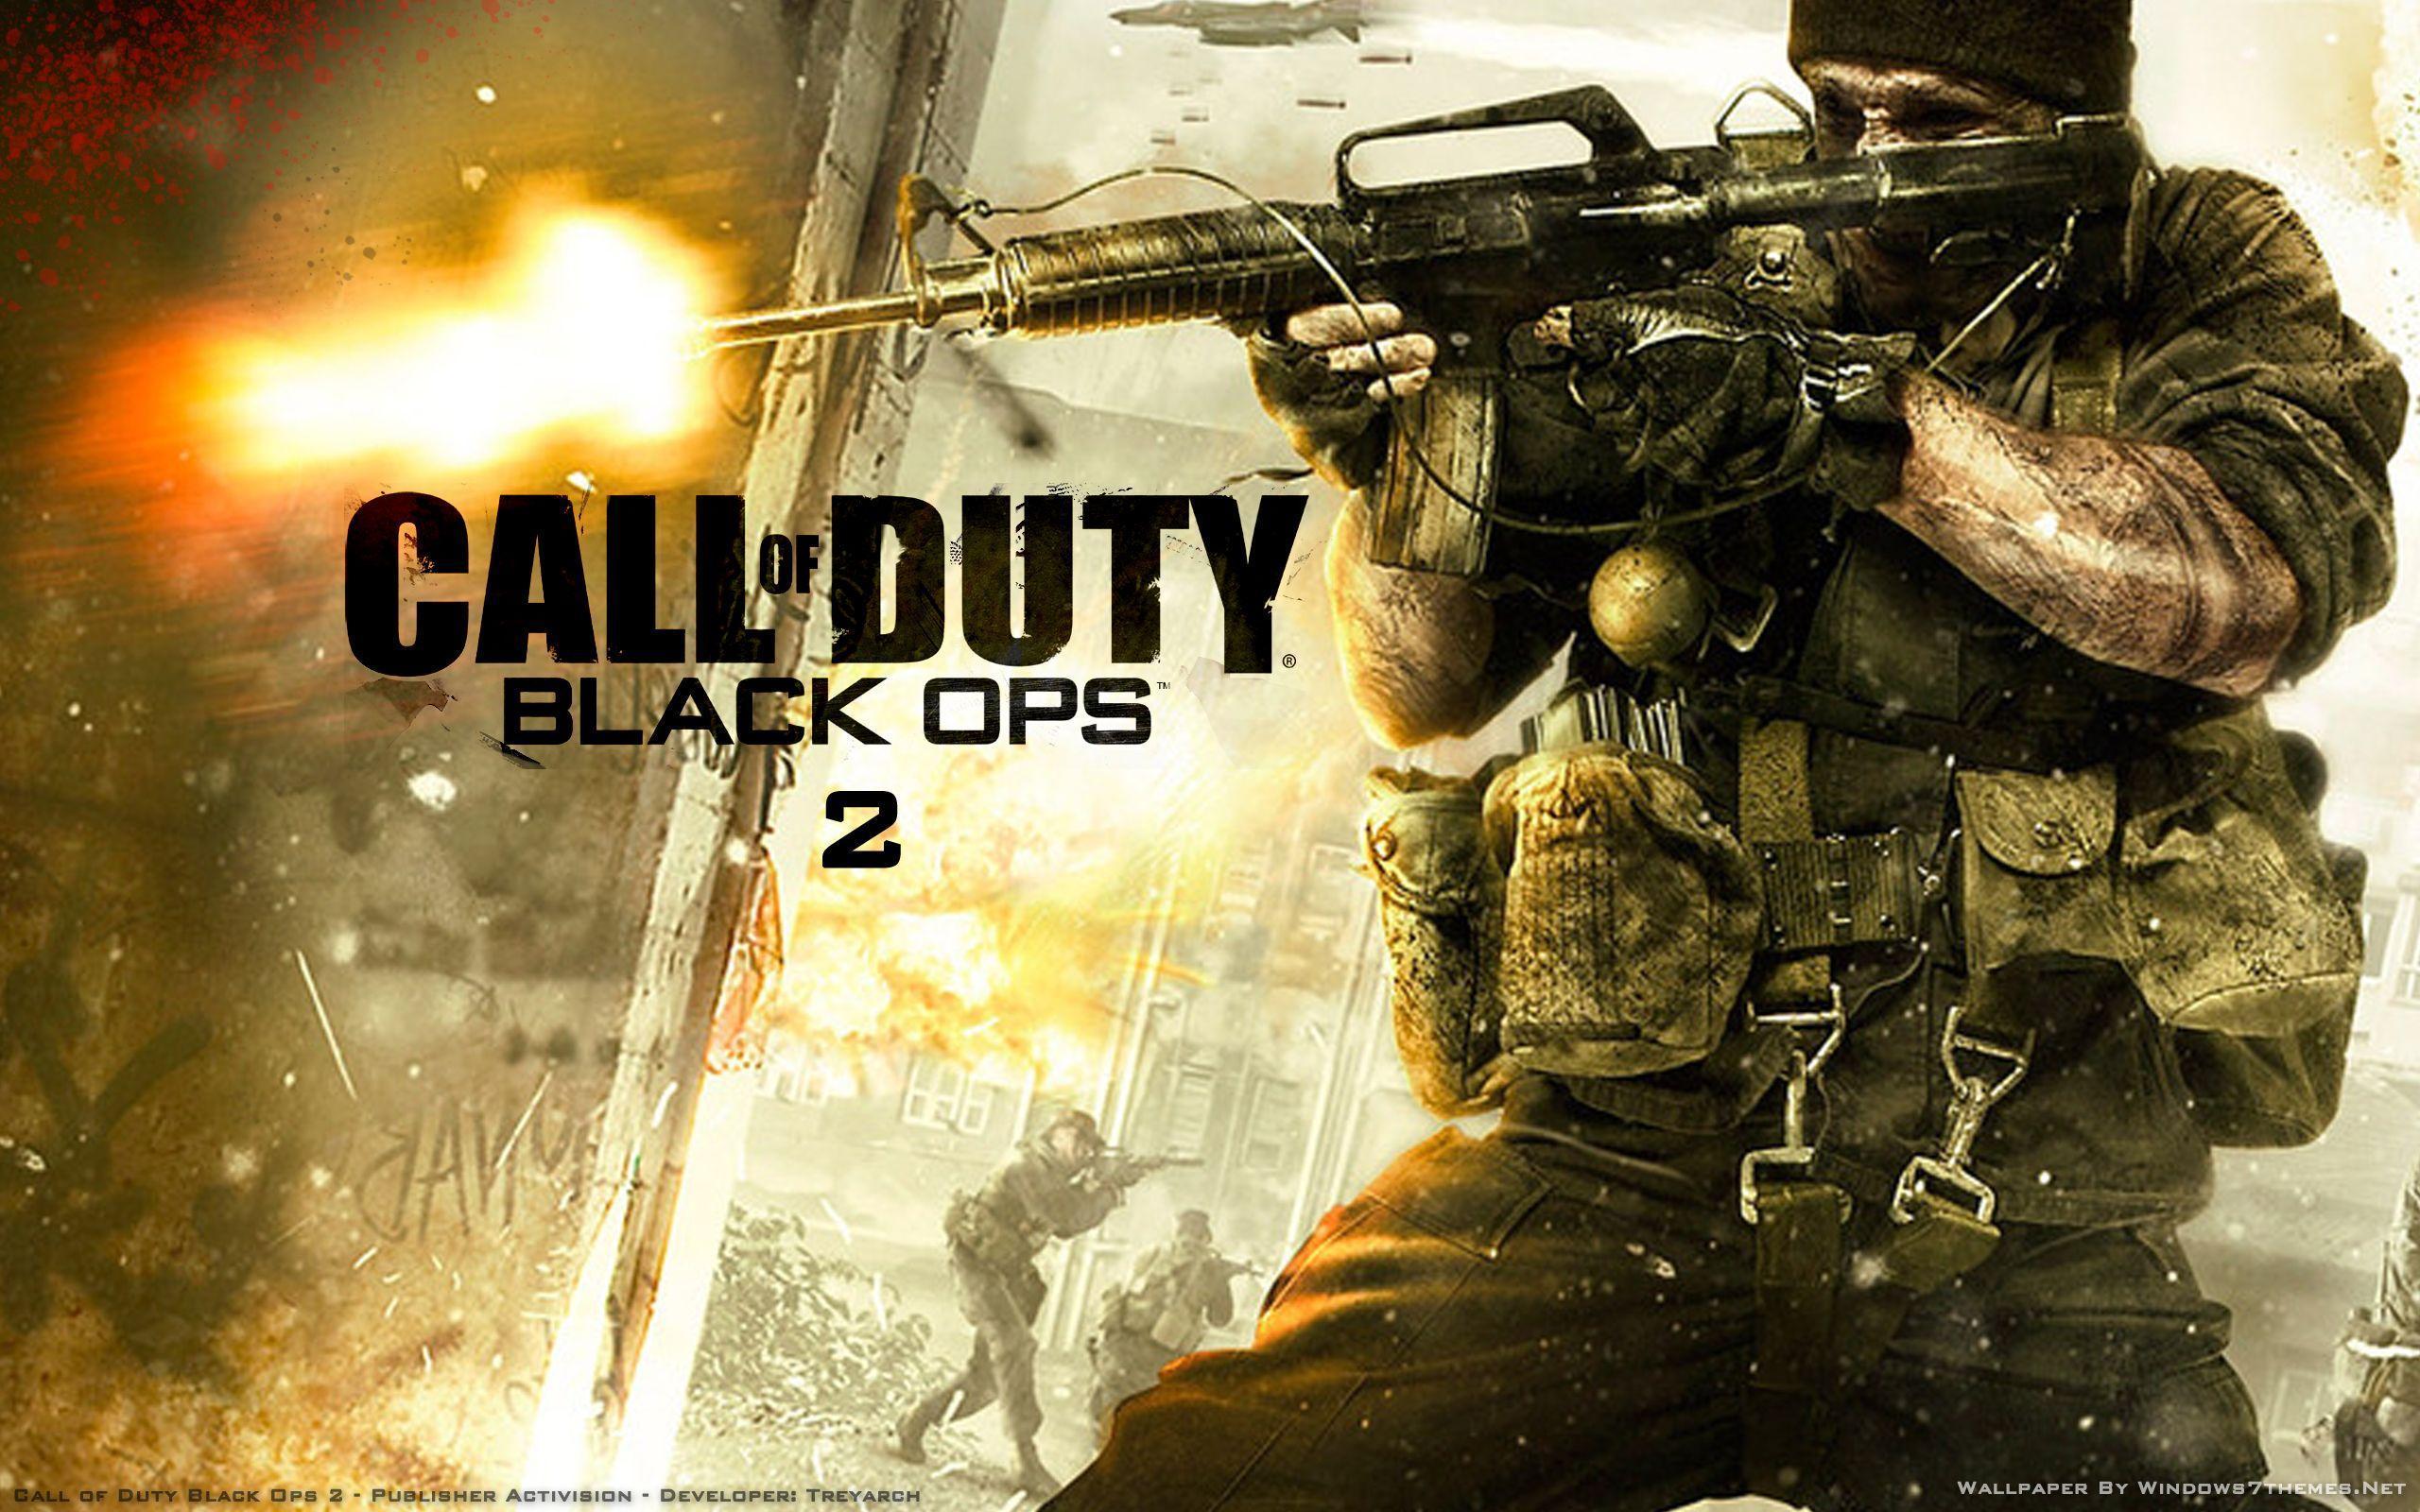 Call Of Duty Black Ops II Wallpapers - Wallpaper Cave